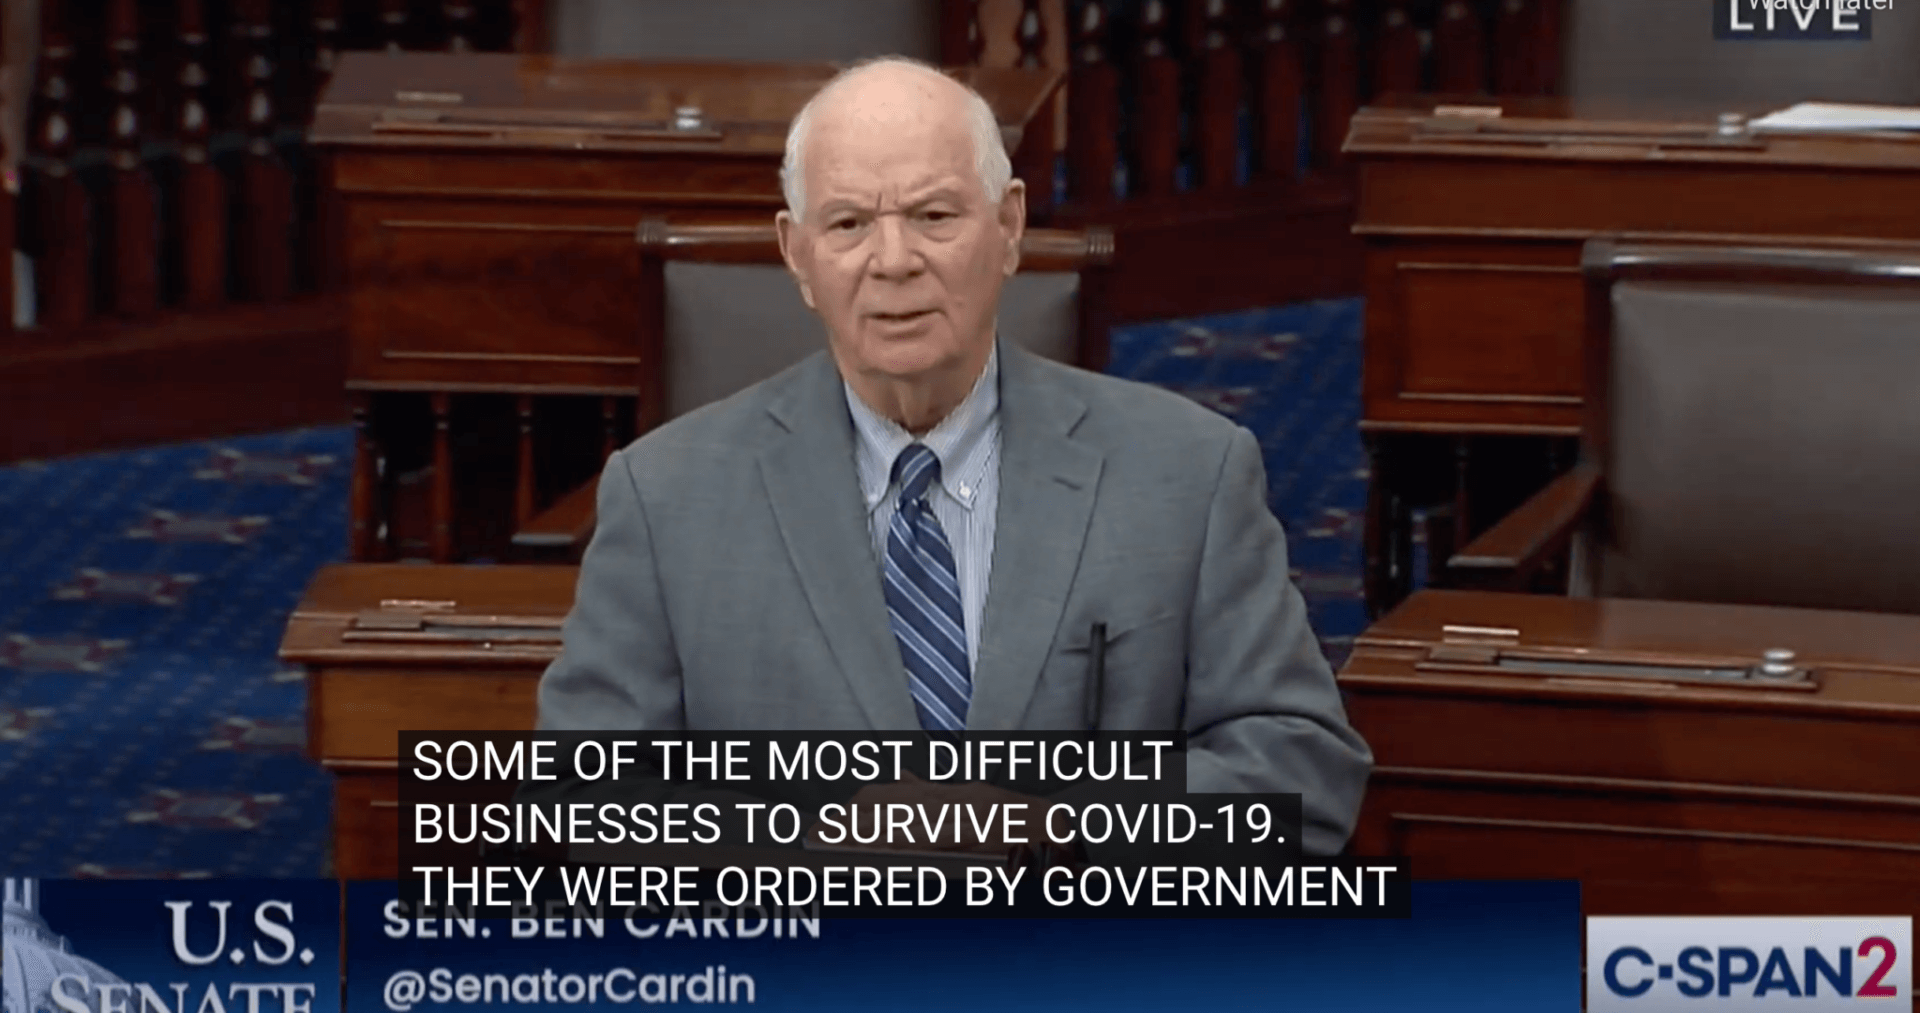 [CREDIT: C-SPAN] U.S. Senate Committee on Small Business & Entrepreneurship Chair Ben Cardin (D-MD) led an effort to fully fund the Restaurant Revitalization Fund in the U.S. Senate.